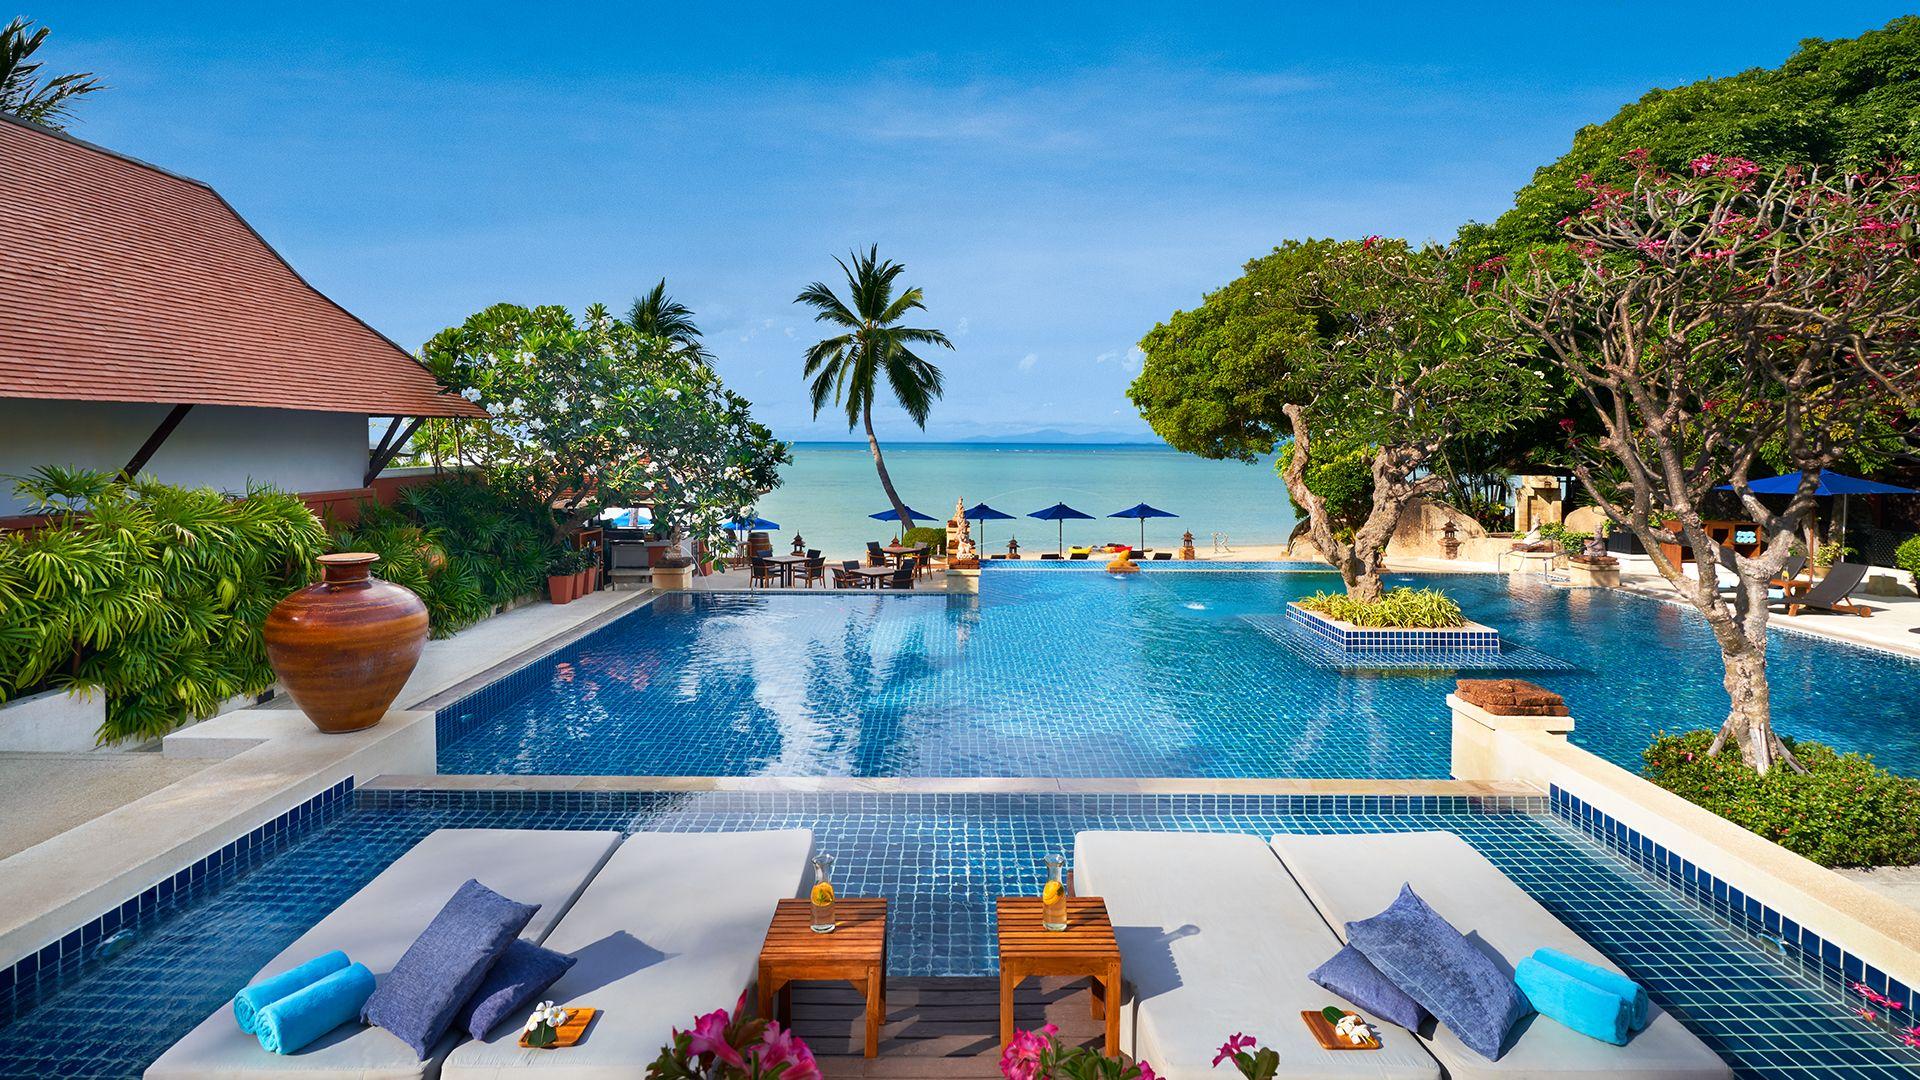 Beachfront Marriott Indulgence With All Inclusive Dining And Daily Cocktails Koh Samui Thailand